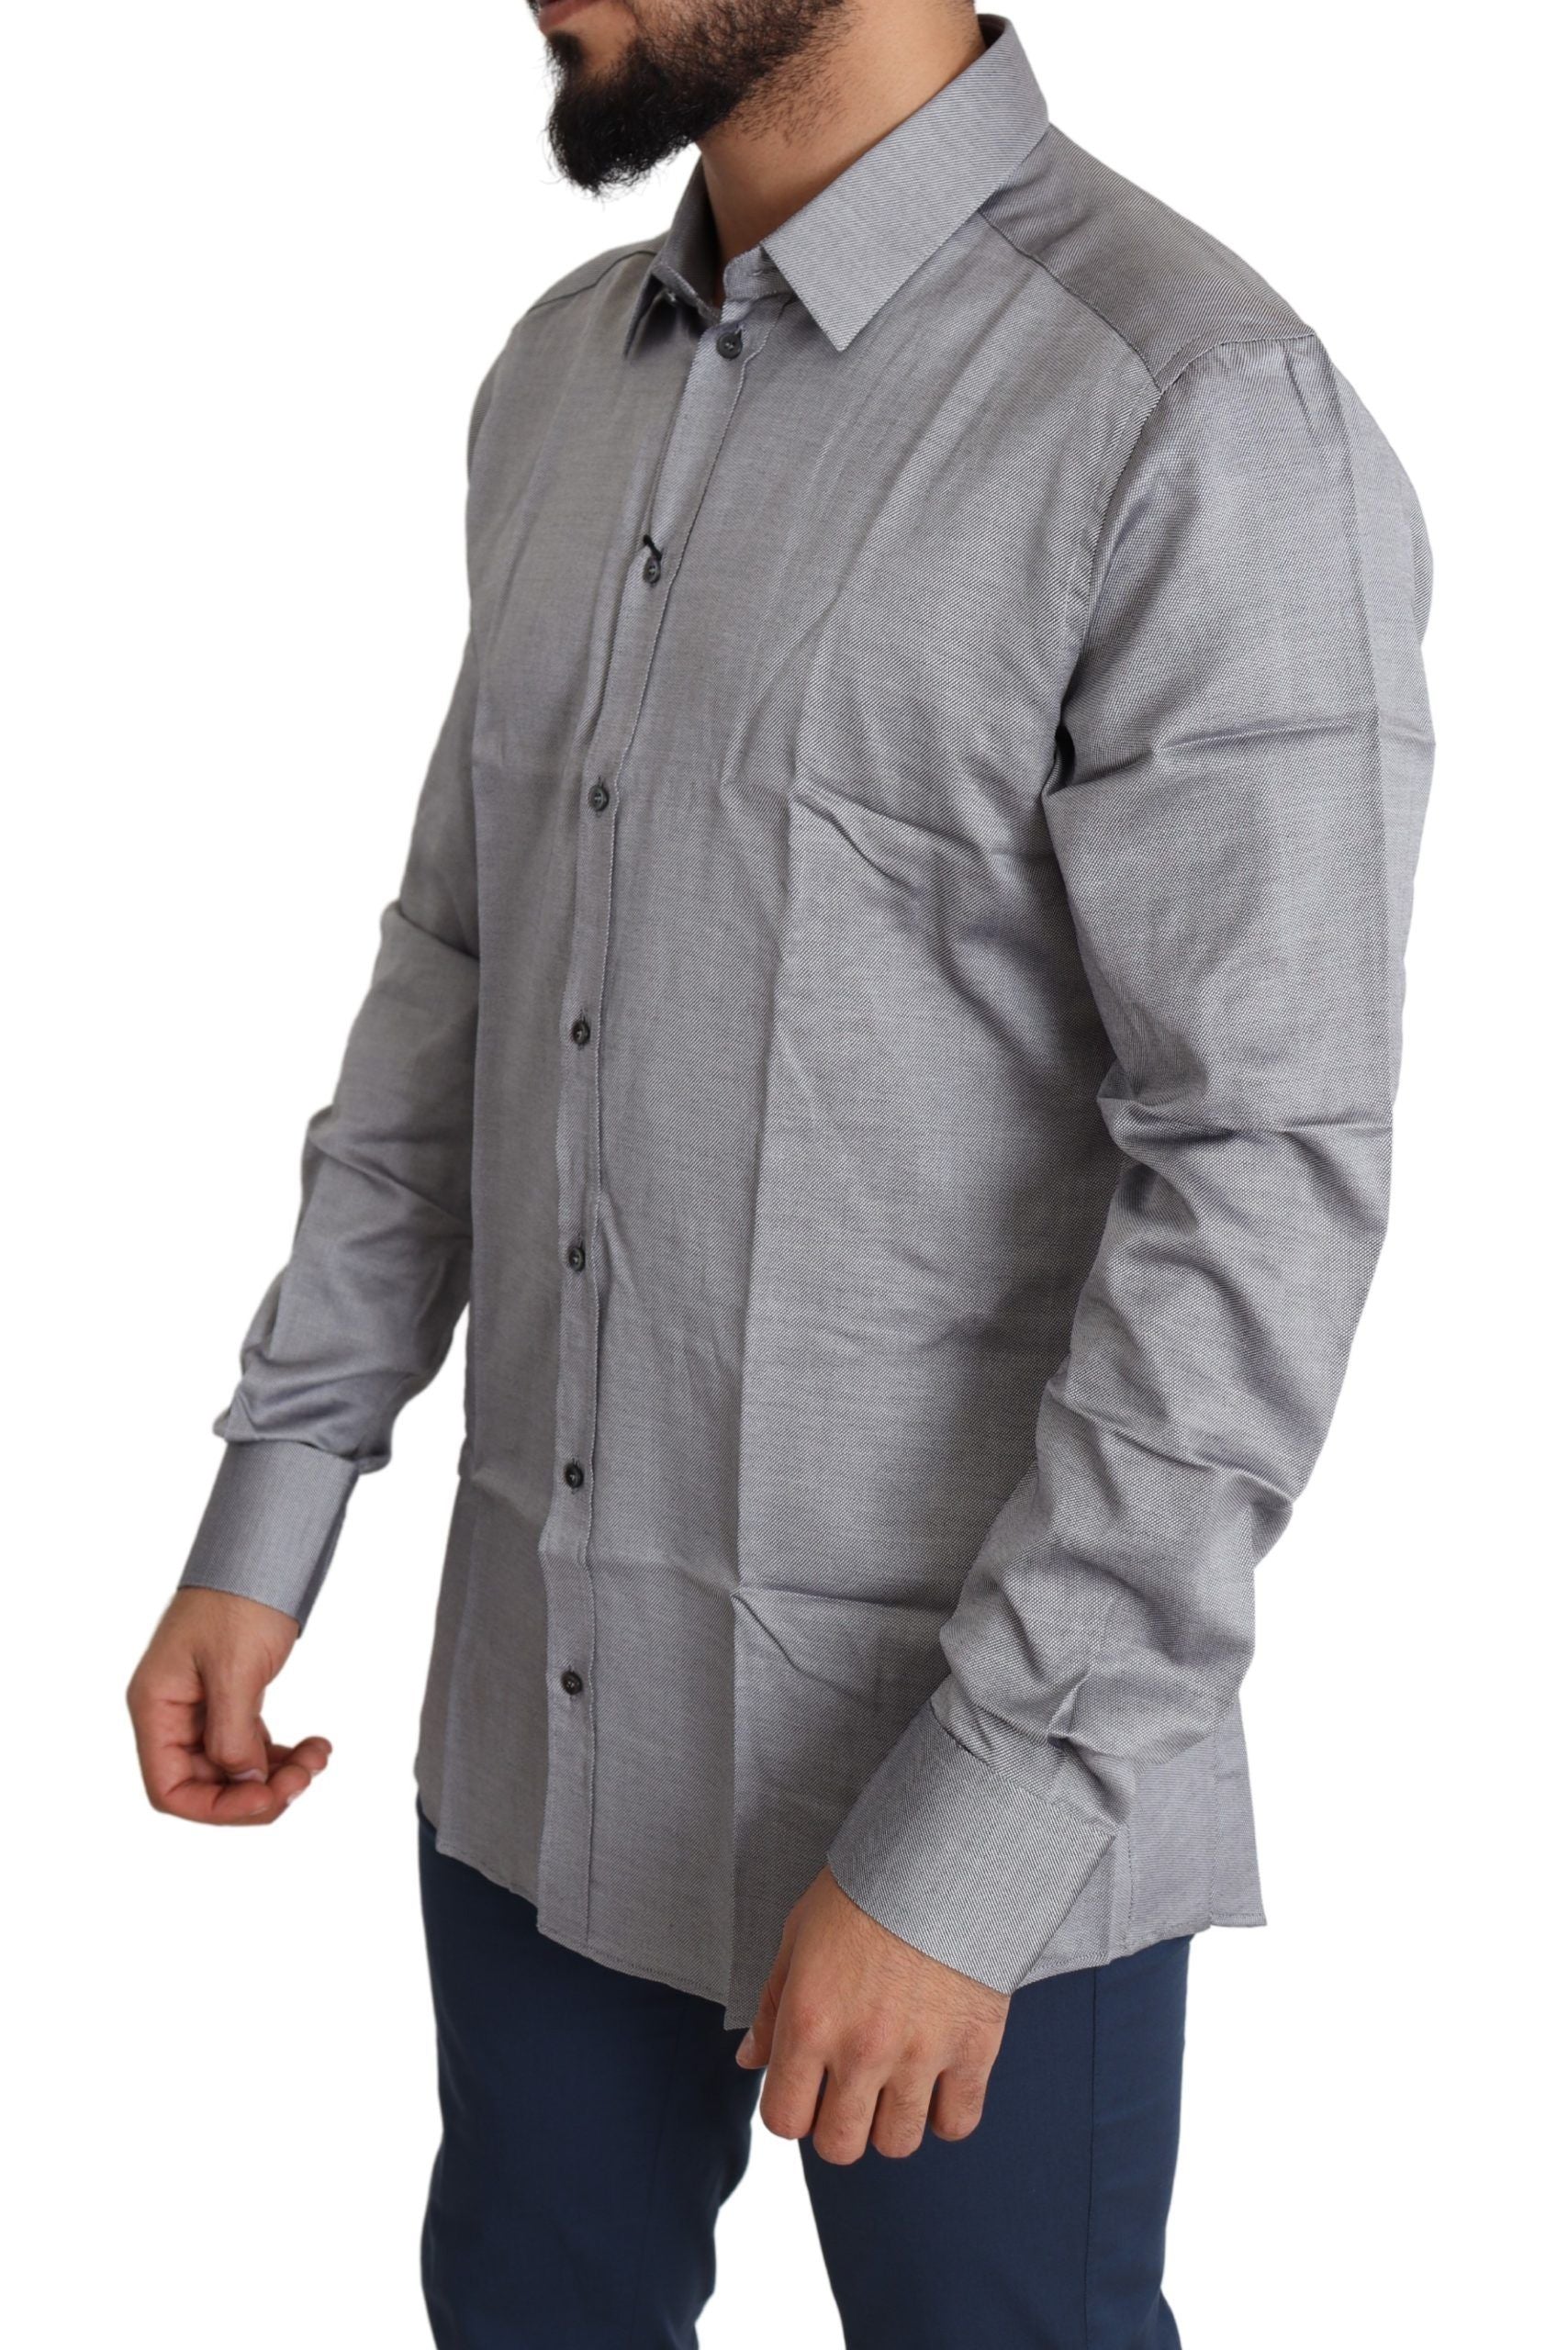 Gray Cotton Men Formal GOLD Dress Shirt - Designed by Dolce & Gabbana Available to Buy at a Discounted Price on Moon Behind The Hill Online Designer Discount Store